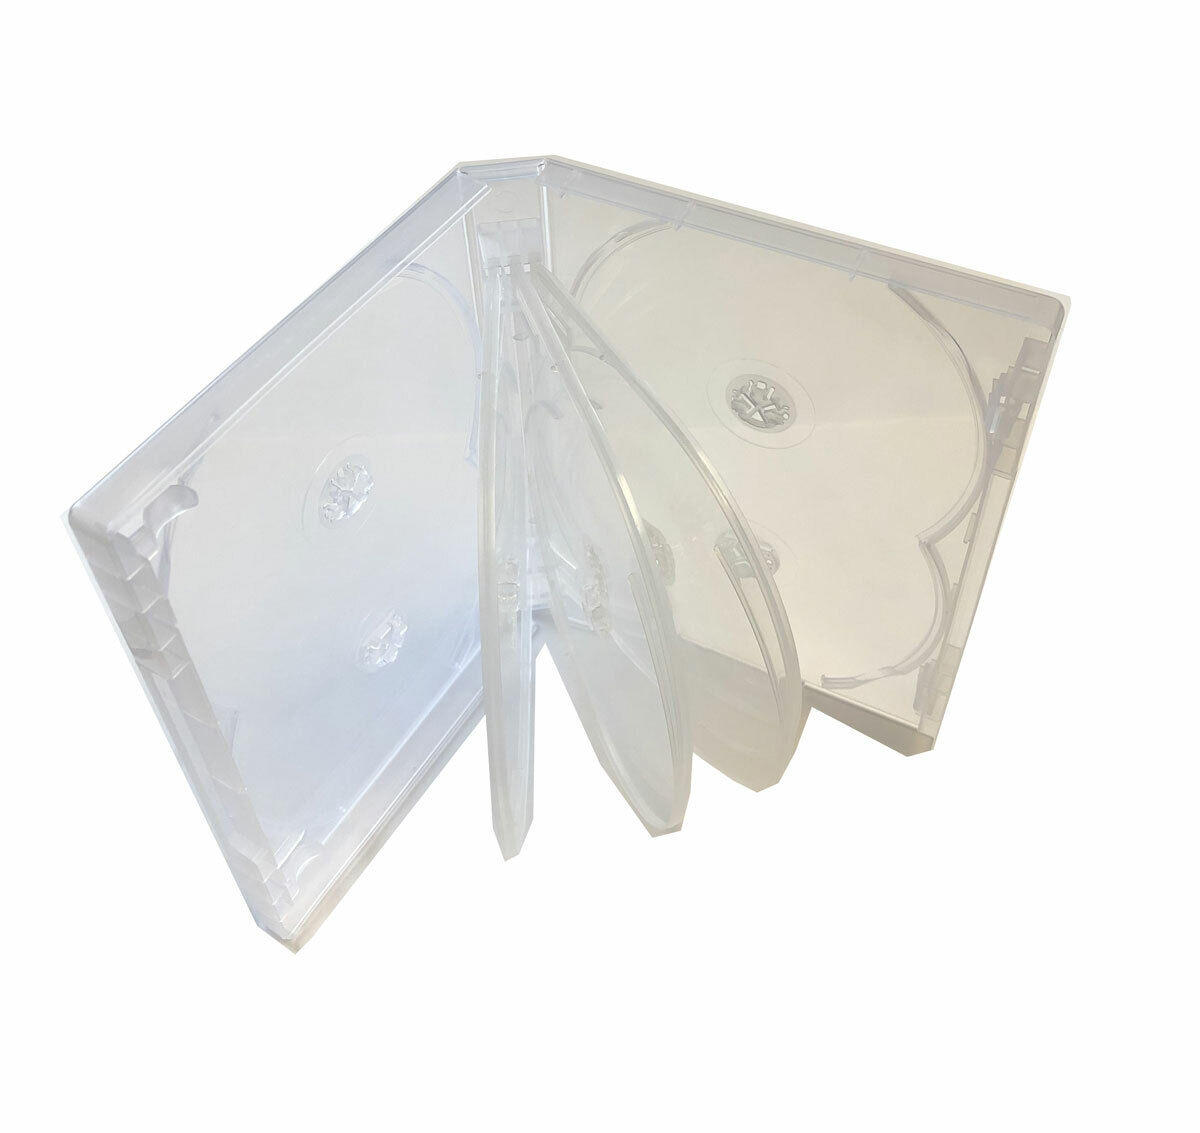 New 1 MegaDisc 25mm Clear DVD Replacement Storage Case Hold 10 Discs Flap Trays